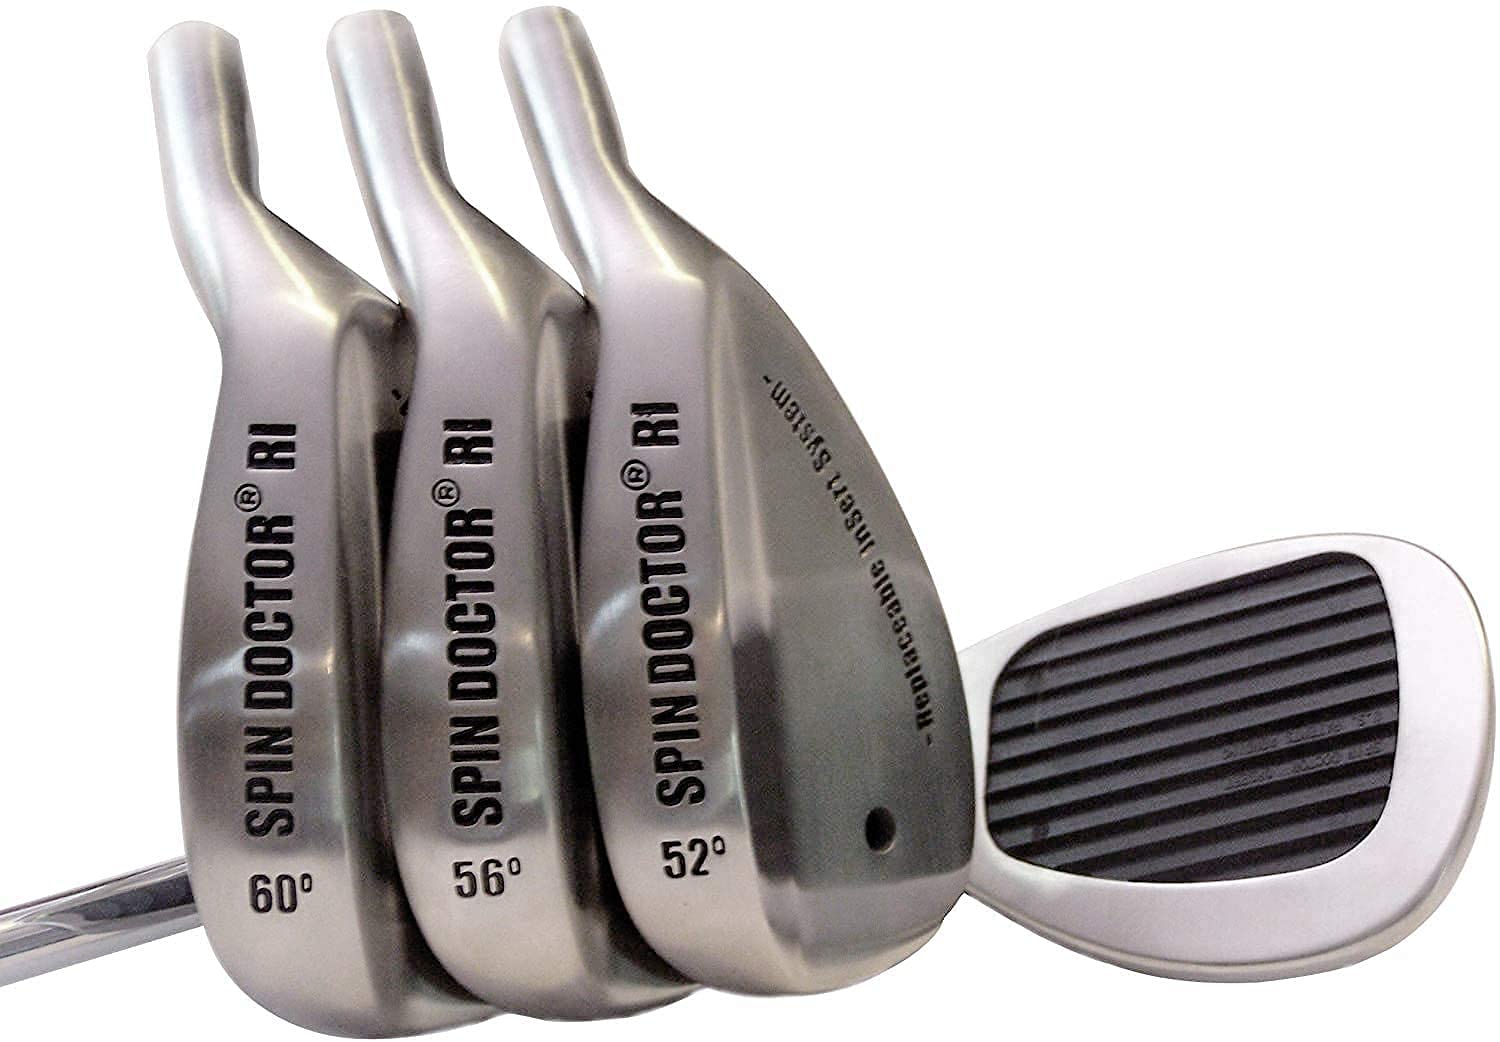 Spin Doctor RI Golf Wedge with The Replaceable Insert System | Steel Wedge | New 52° Pitching Wedge, 56° Sand Wedge, 60° Lob Wedge - Reverse Groove and Titanium Inserts - Right Hand (Set of 3)